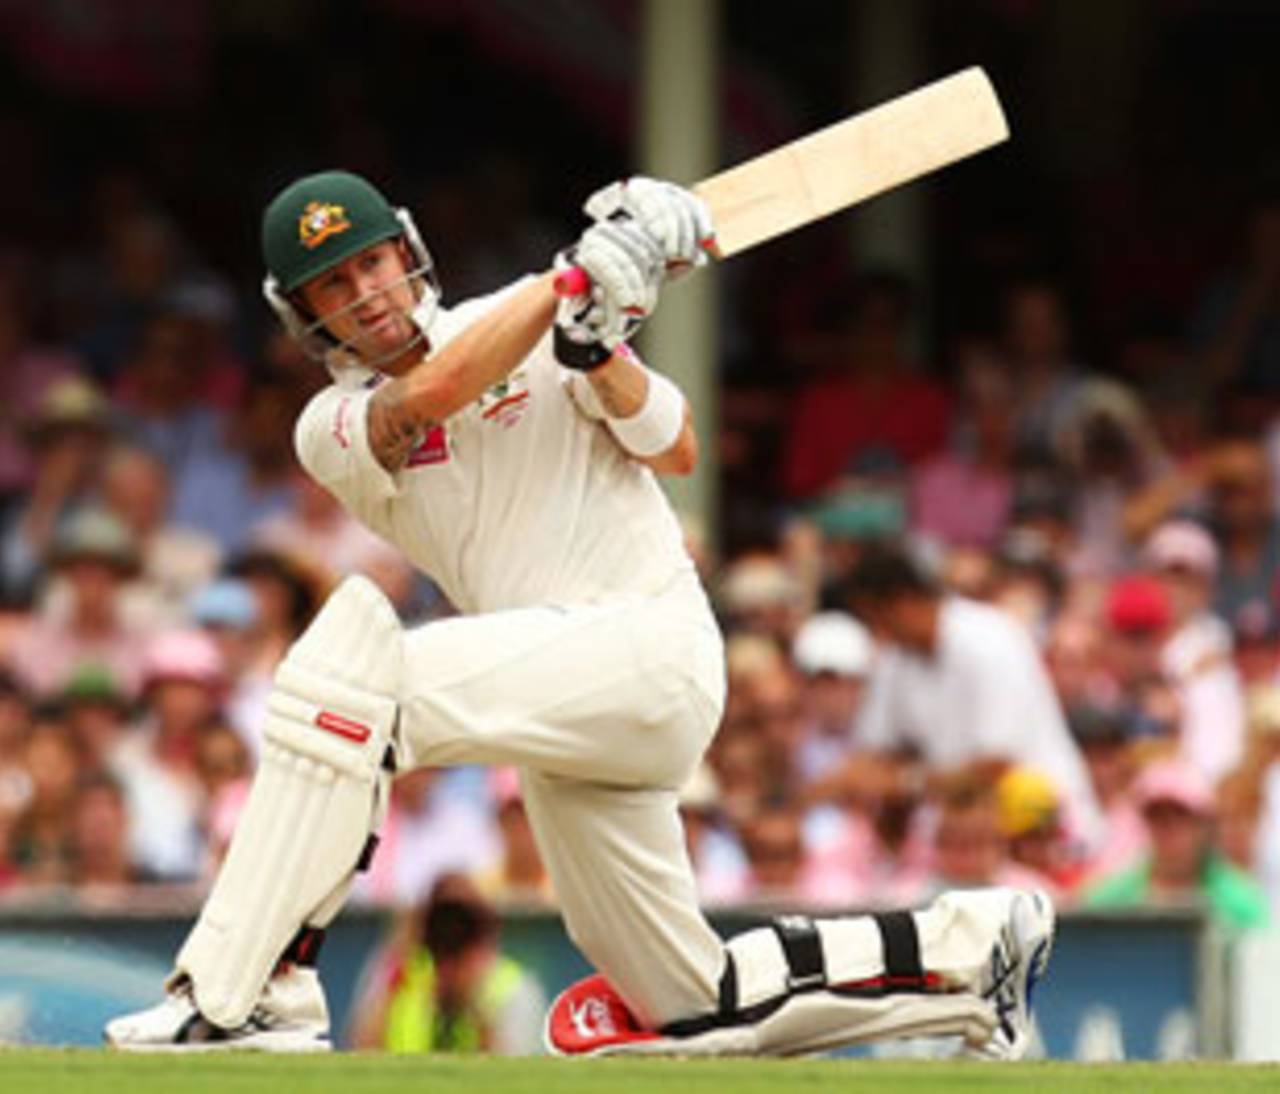 It was symbolic of the cricketer he has become that Michael Clarke reached his triple century with an unsponsored bat&nbsp;&nbsp;&bull;&nbsp;&nbsp;Getty Images